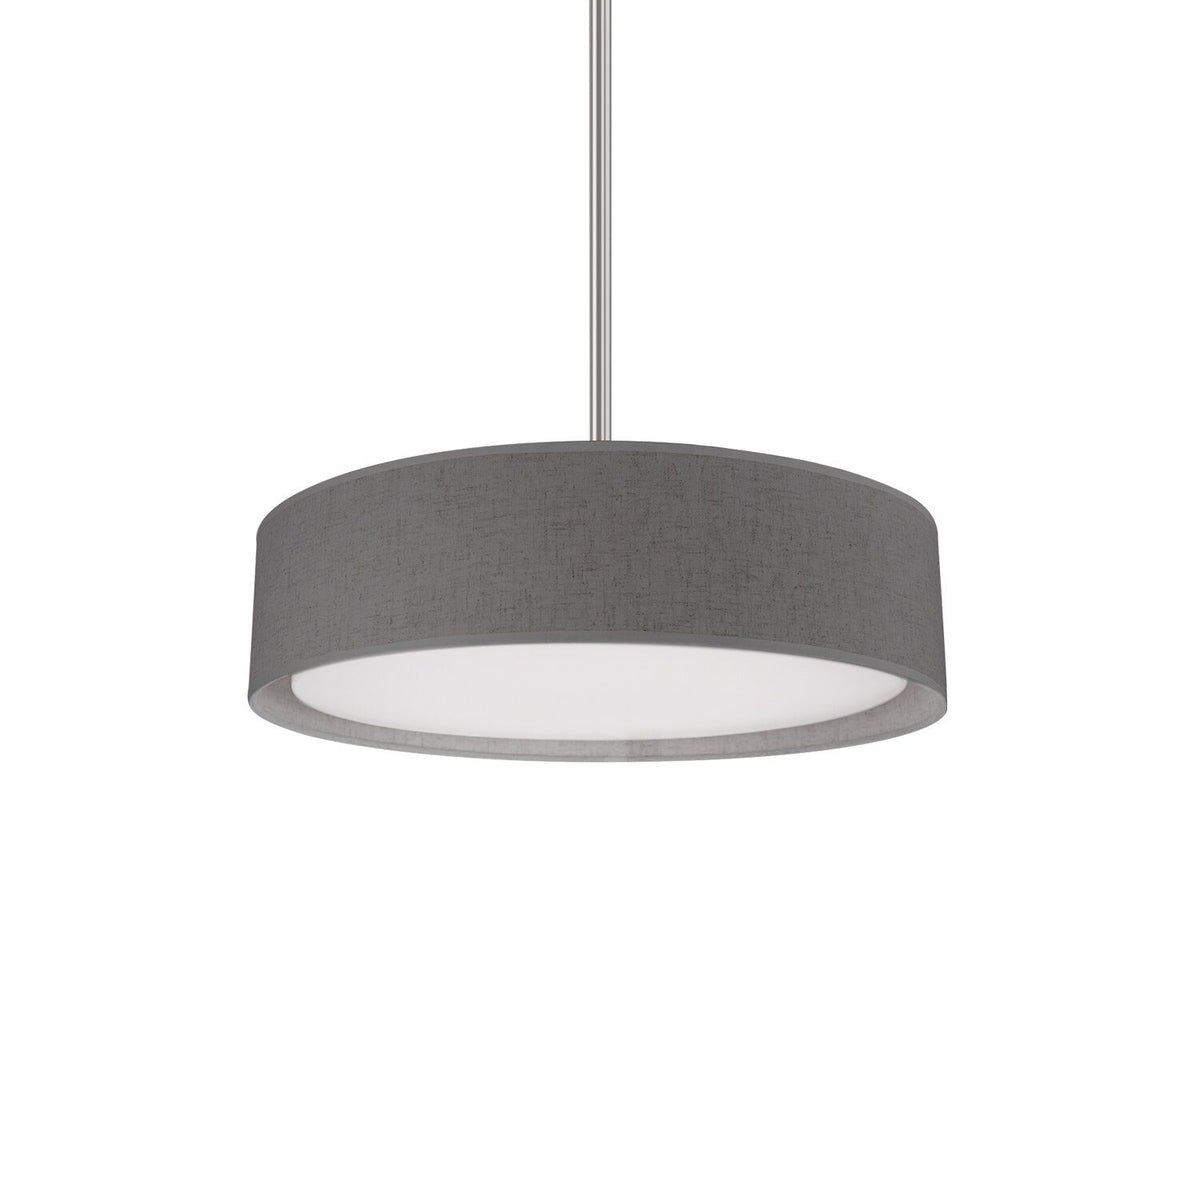 DALTON 16-INCH ROUND LED PENDANT LIGHT WITH COLOURED HAND TAILORED TEXTURED FABRIC SHADE